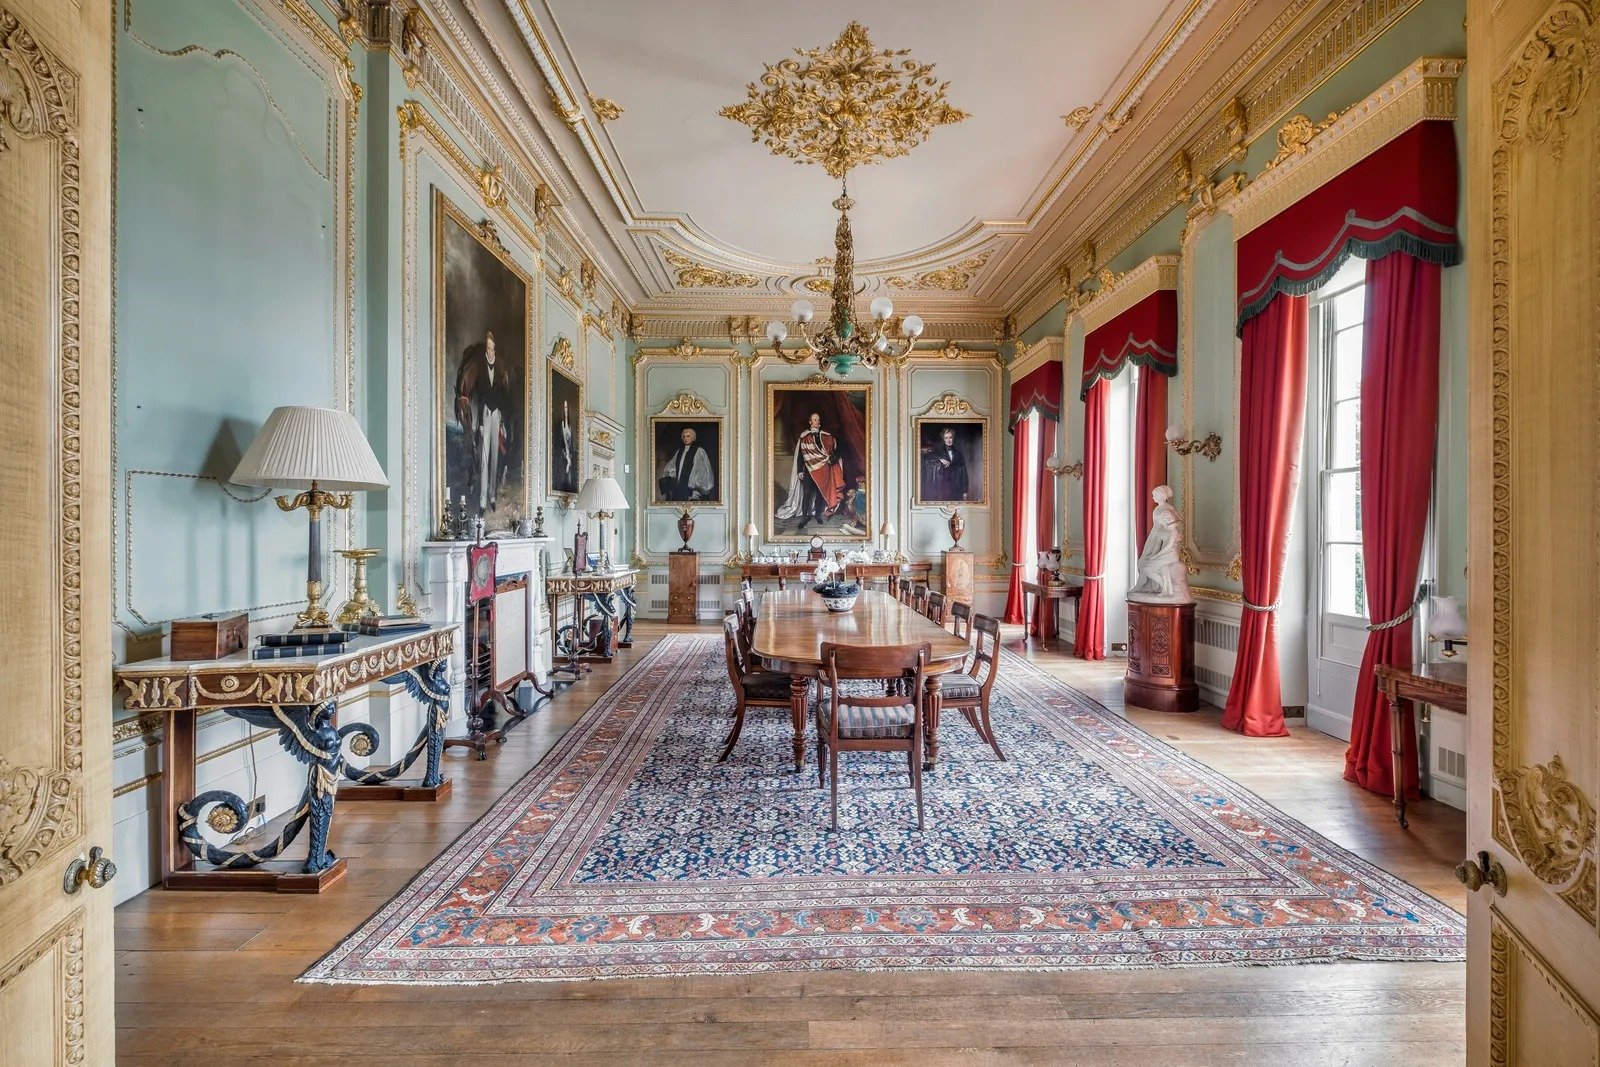 The dining room, where portraits of former residents the cornwallies family hang